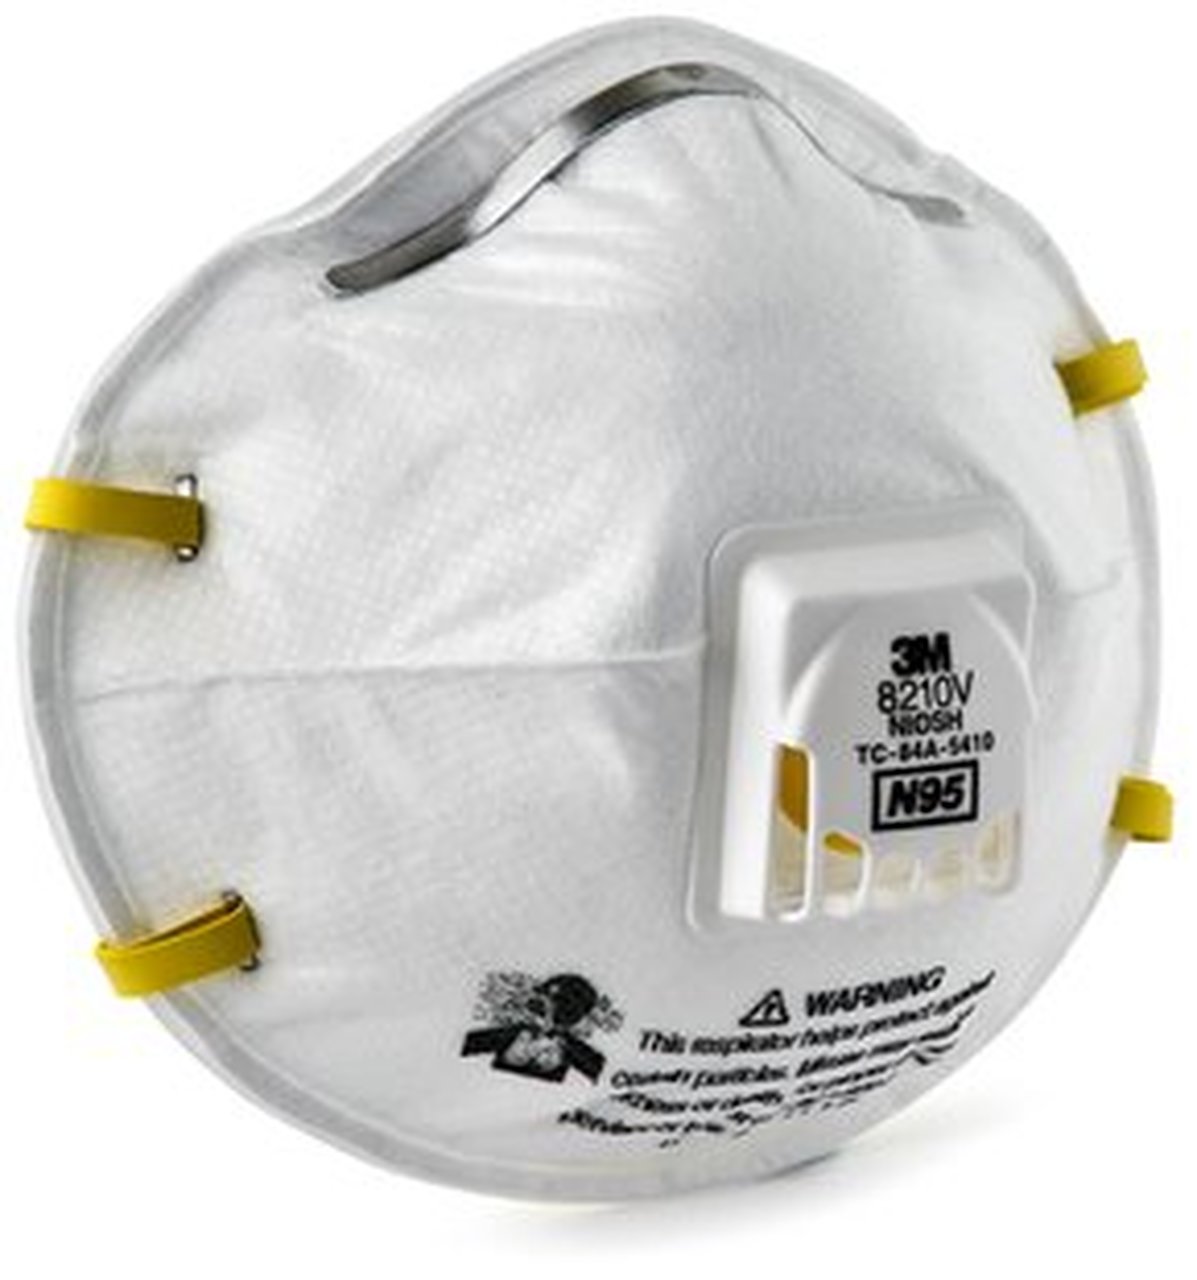 3M N95 Disposable Respirator with Exhalation Valve 8210V